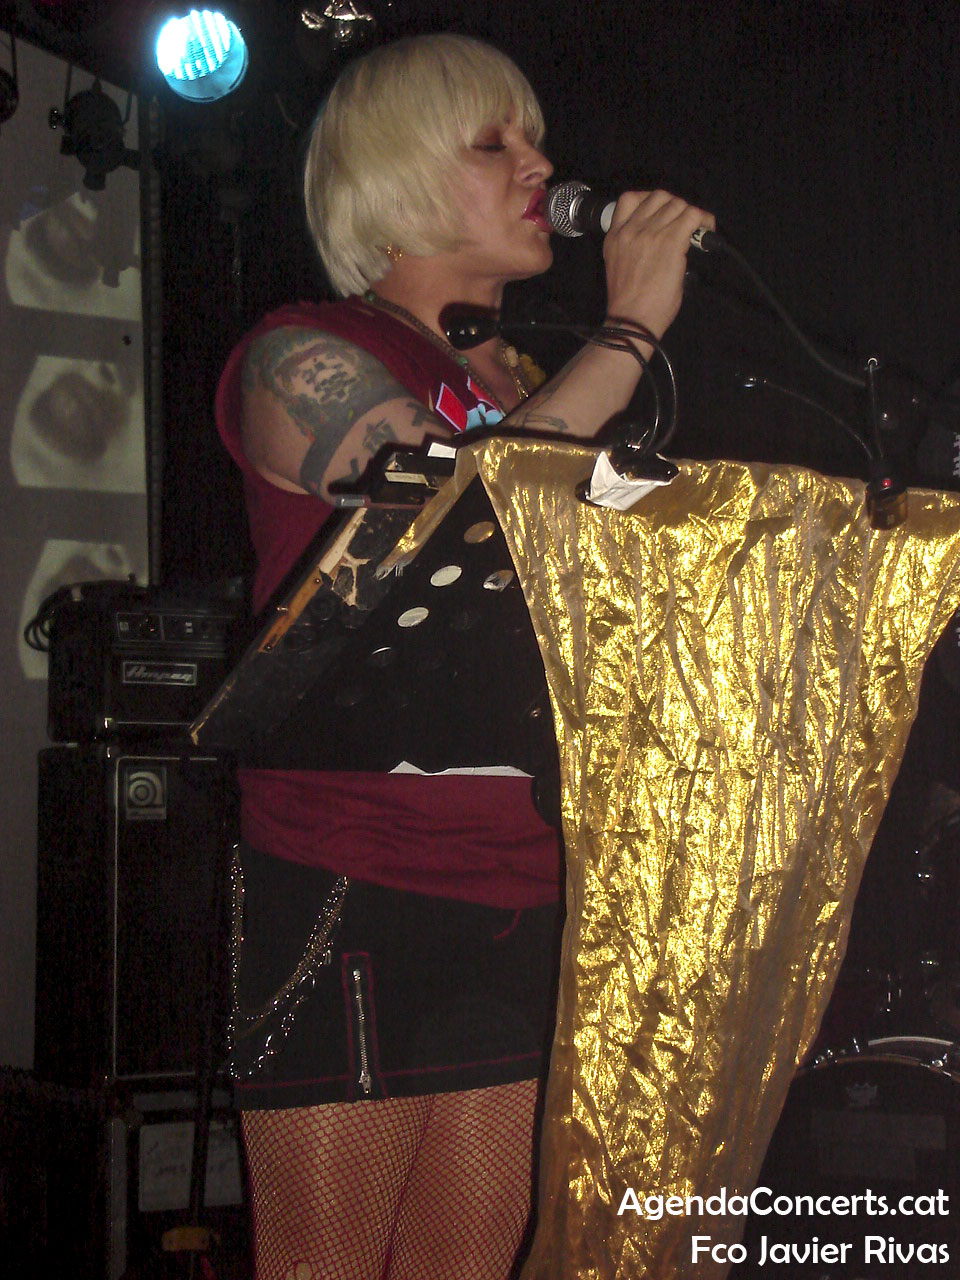 Psychic TV, performing at Sala Apolo 2 of Barcelona.